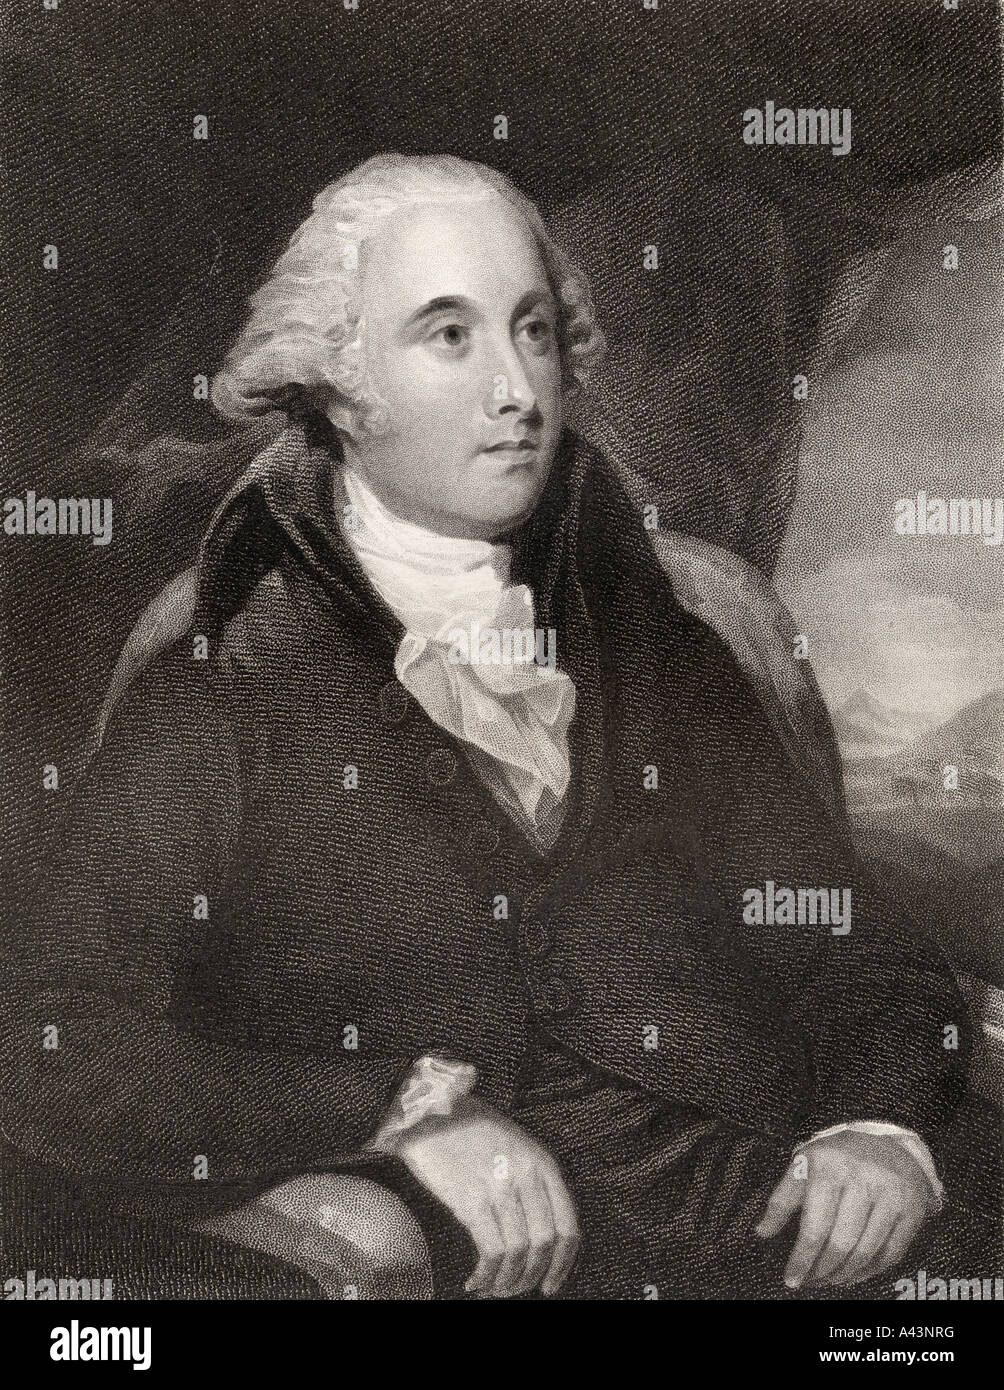 Robert Dundas of Arniston, 1758 - 1819. Judge and Chief Baron of the Exchequer Court in Scotland. Stock Photo